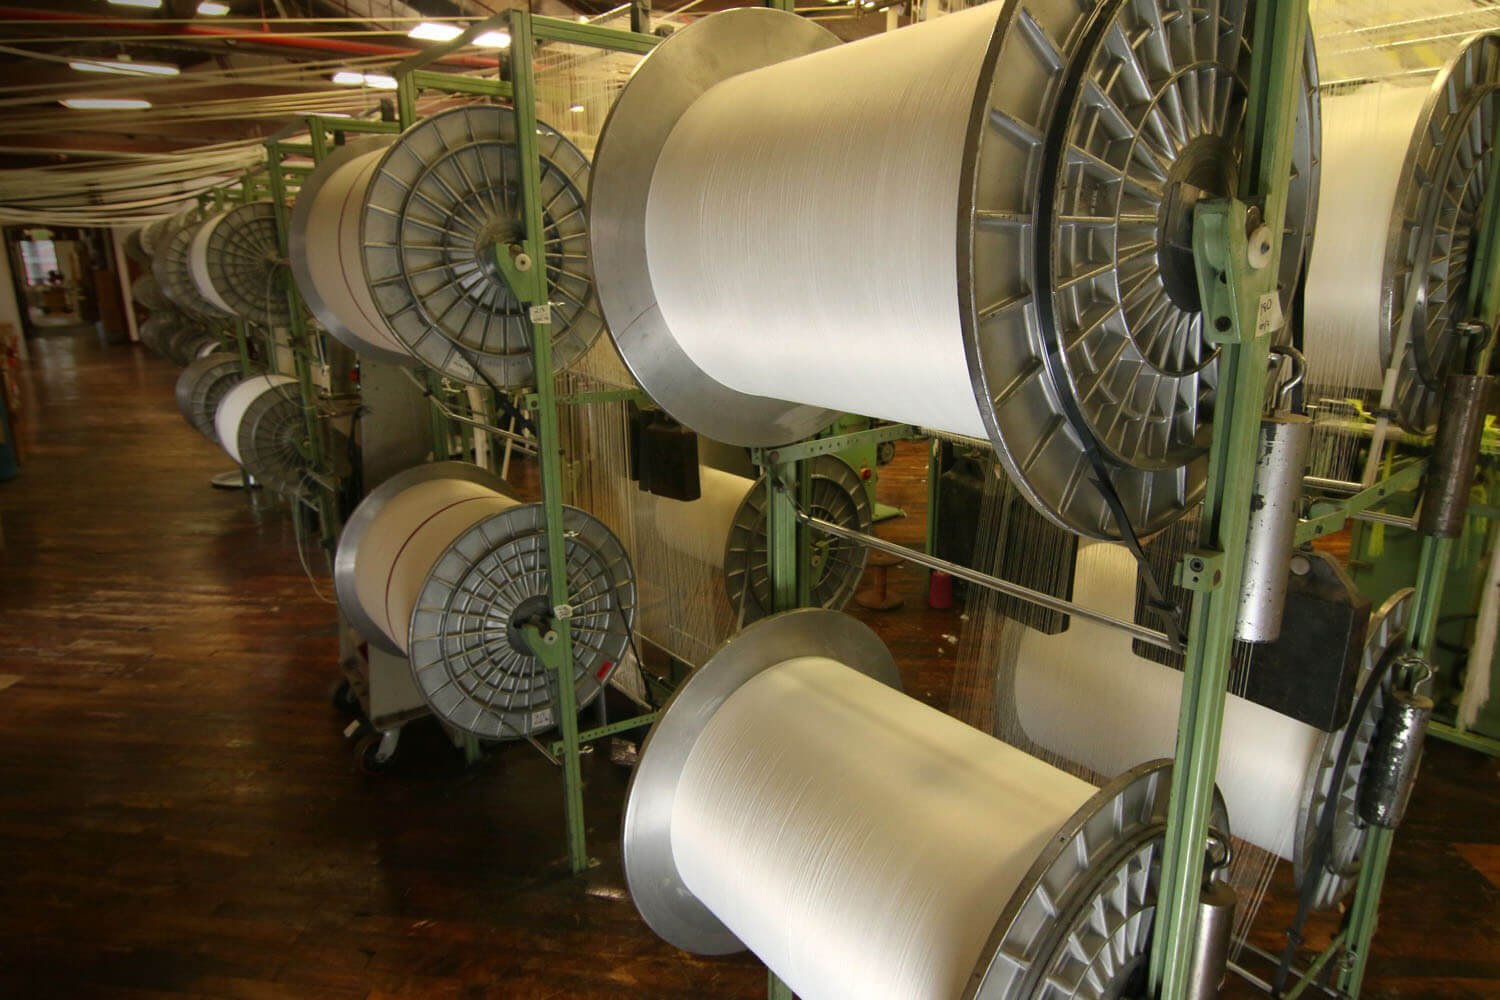 Large spools of white fabric stored inside a textile facility